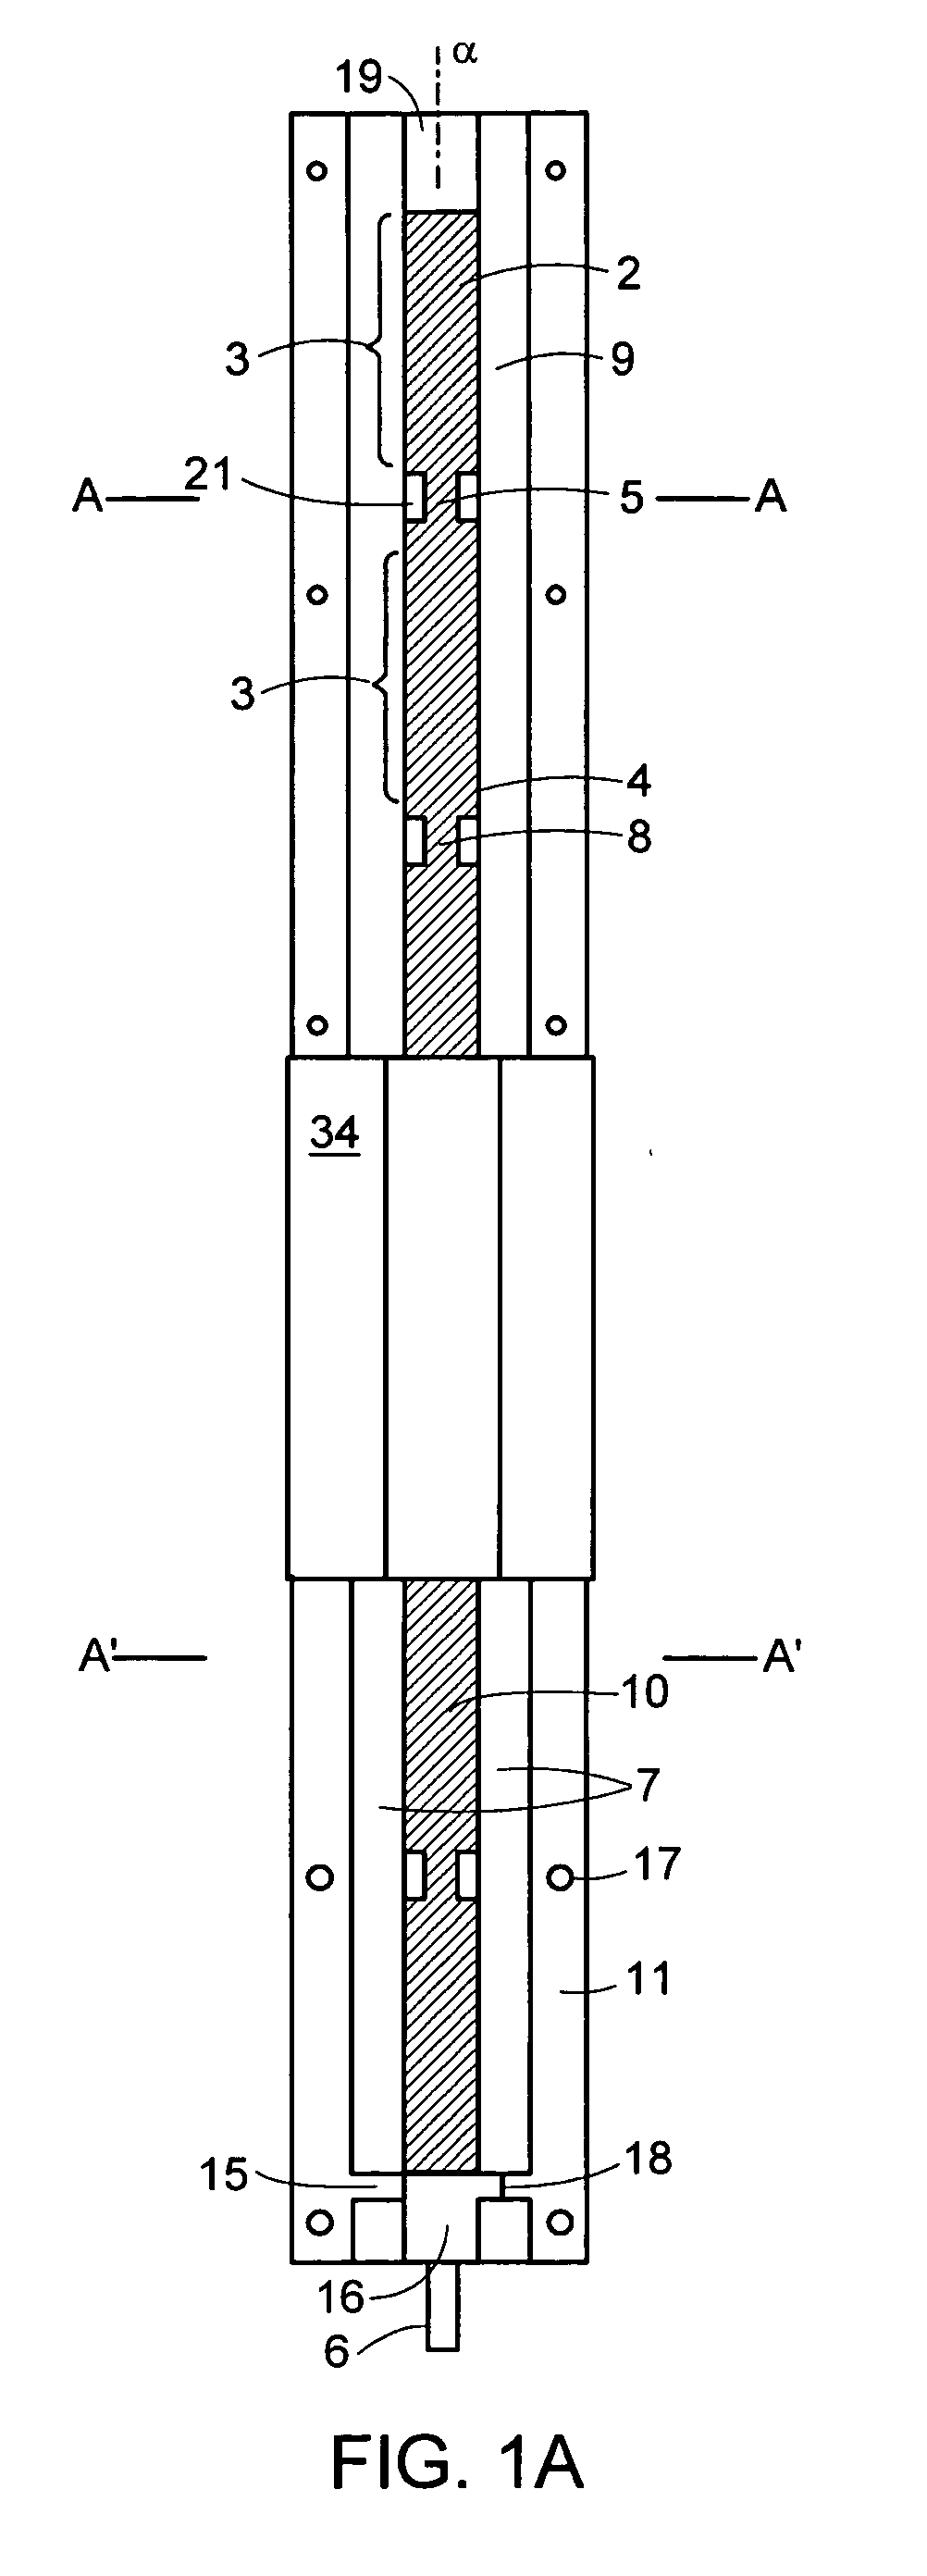 Long-span lead screw assembly with anti-backlash nut